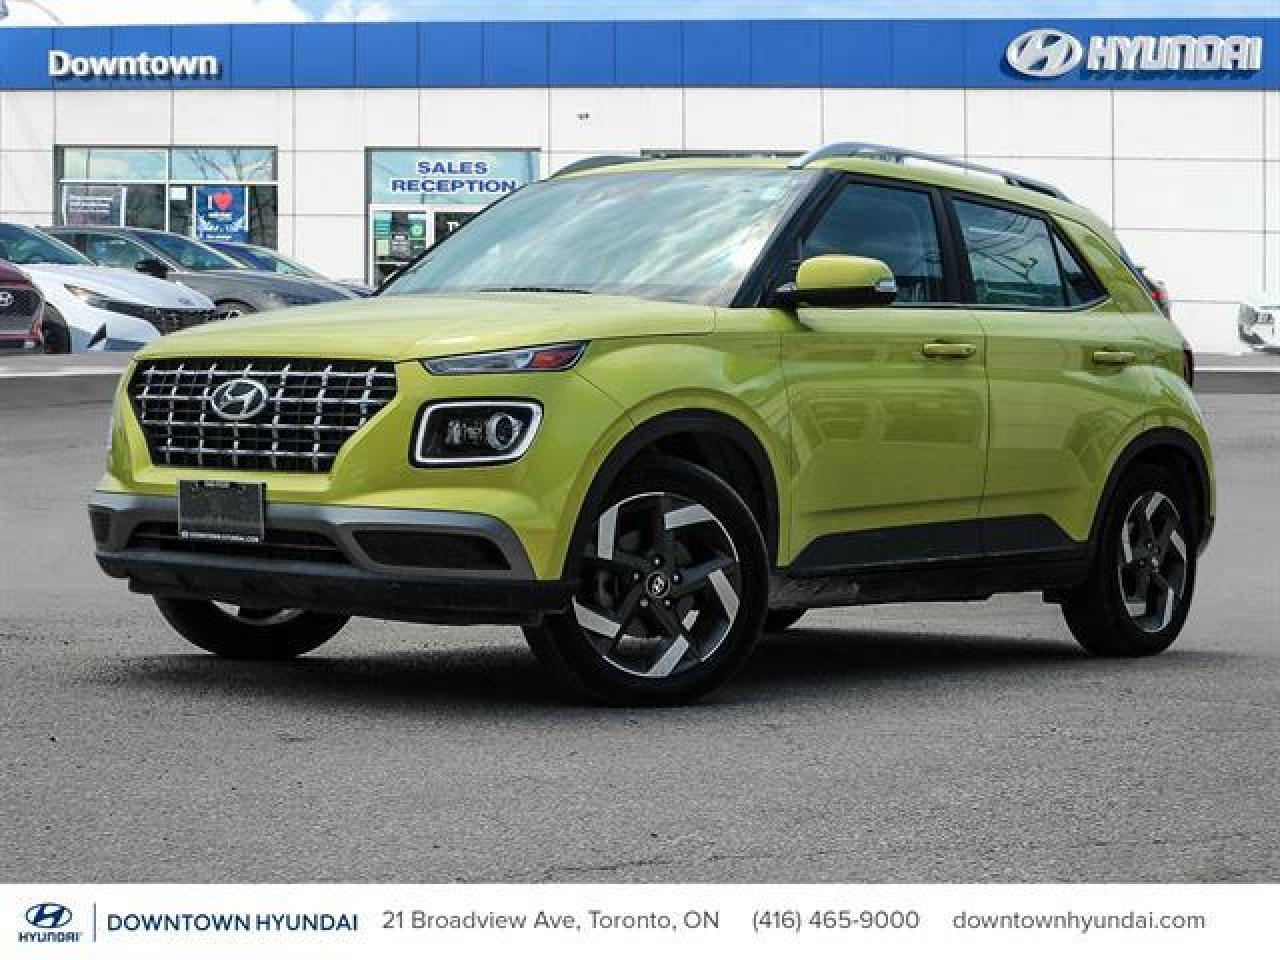 Used 2020 Hyundai Venue for Sale in Toronto, Ontario  Carpages.ca